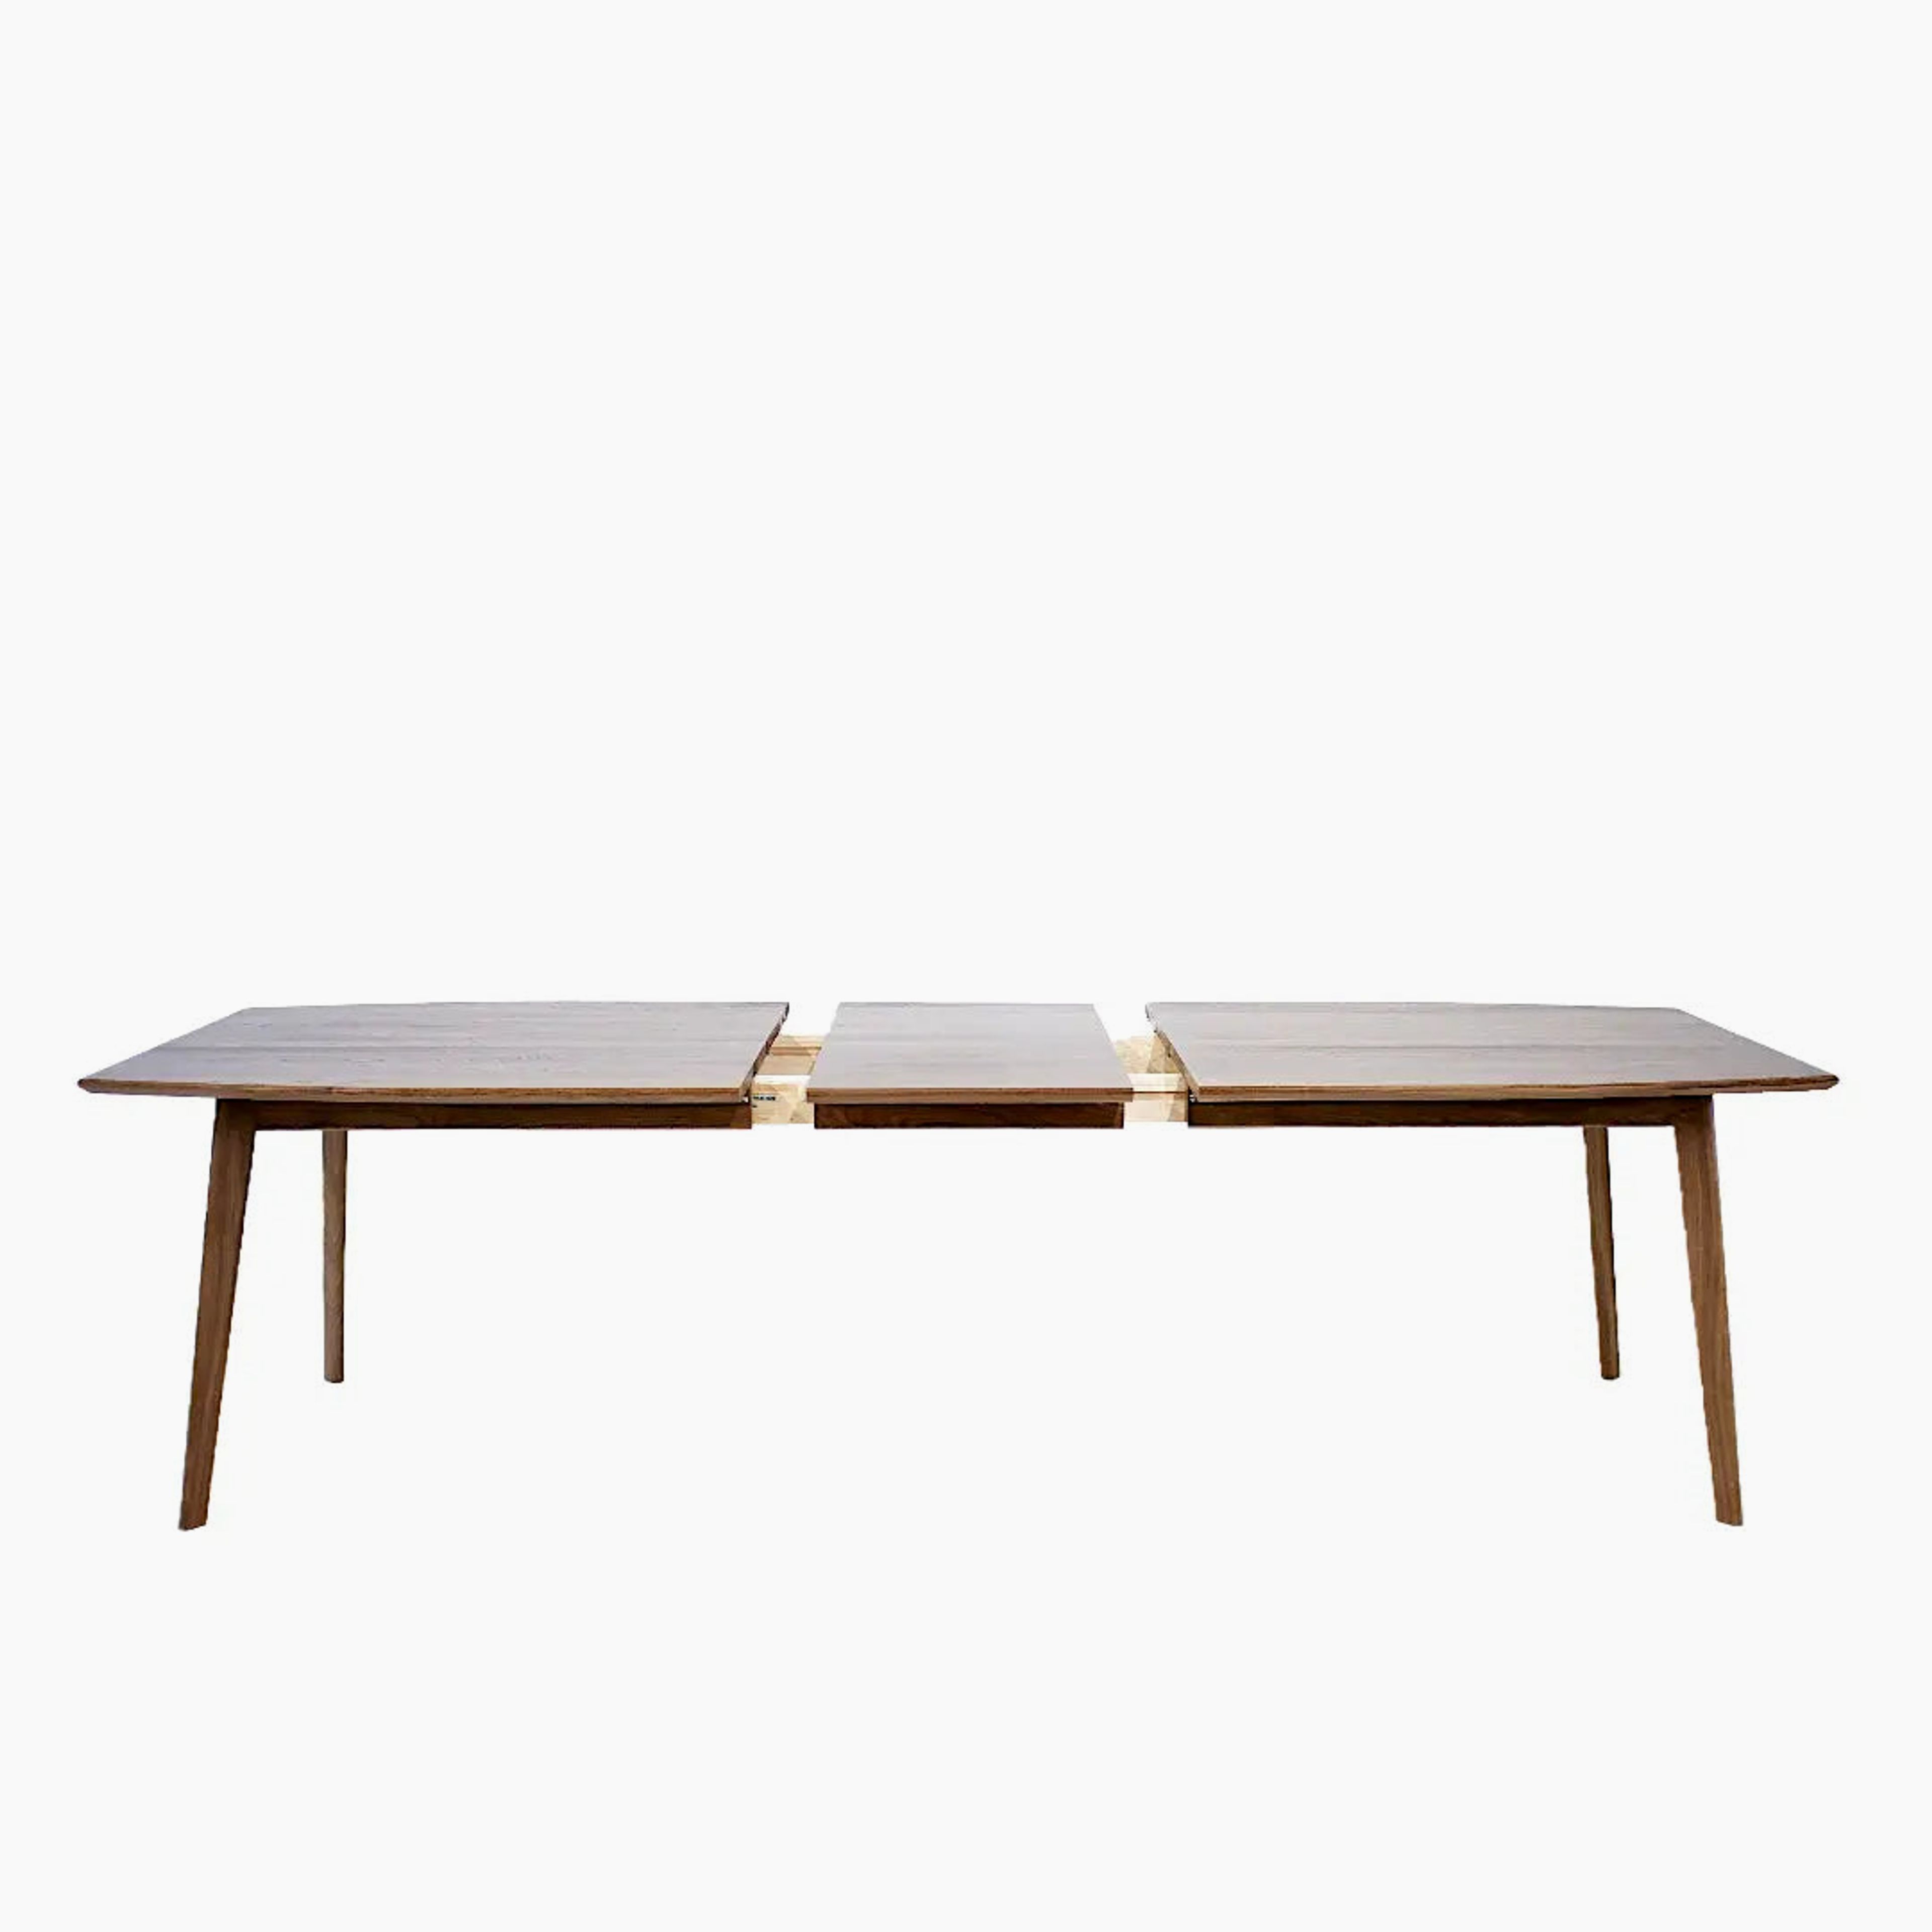 The Santa Monica Extension Table: Classic Mid Century Modern Dining Table